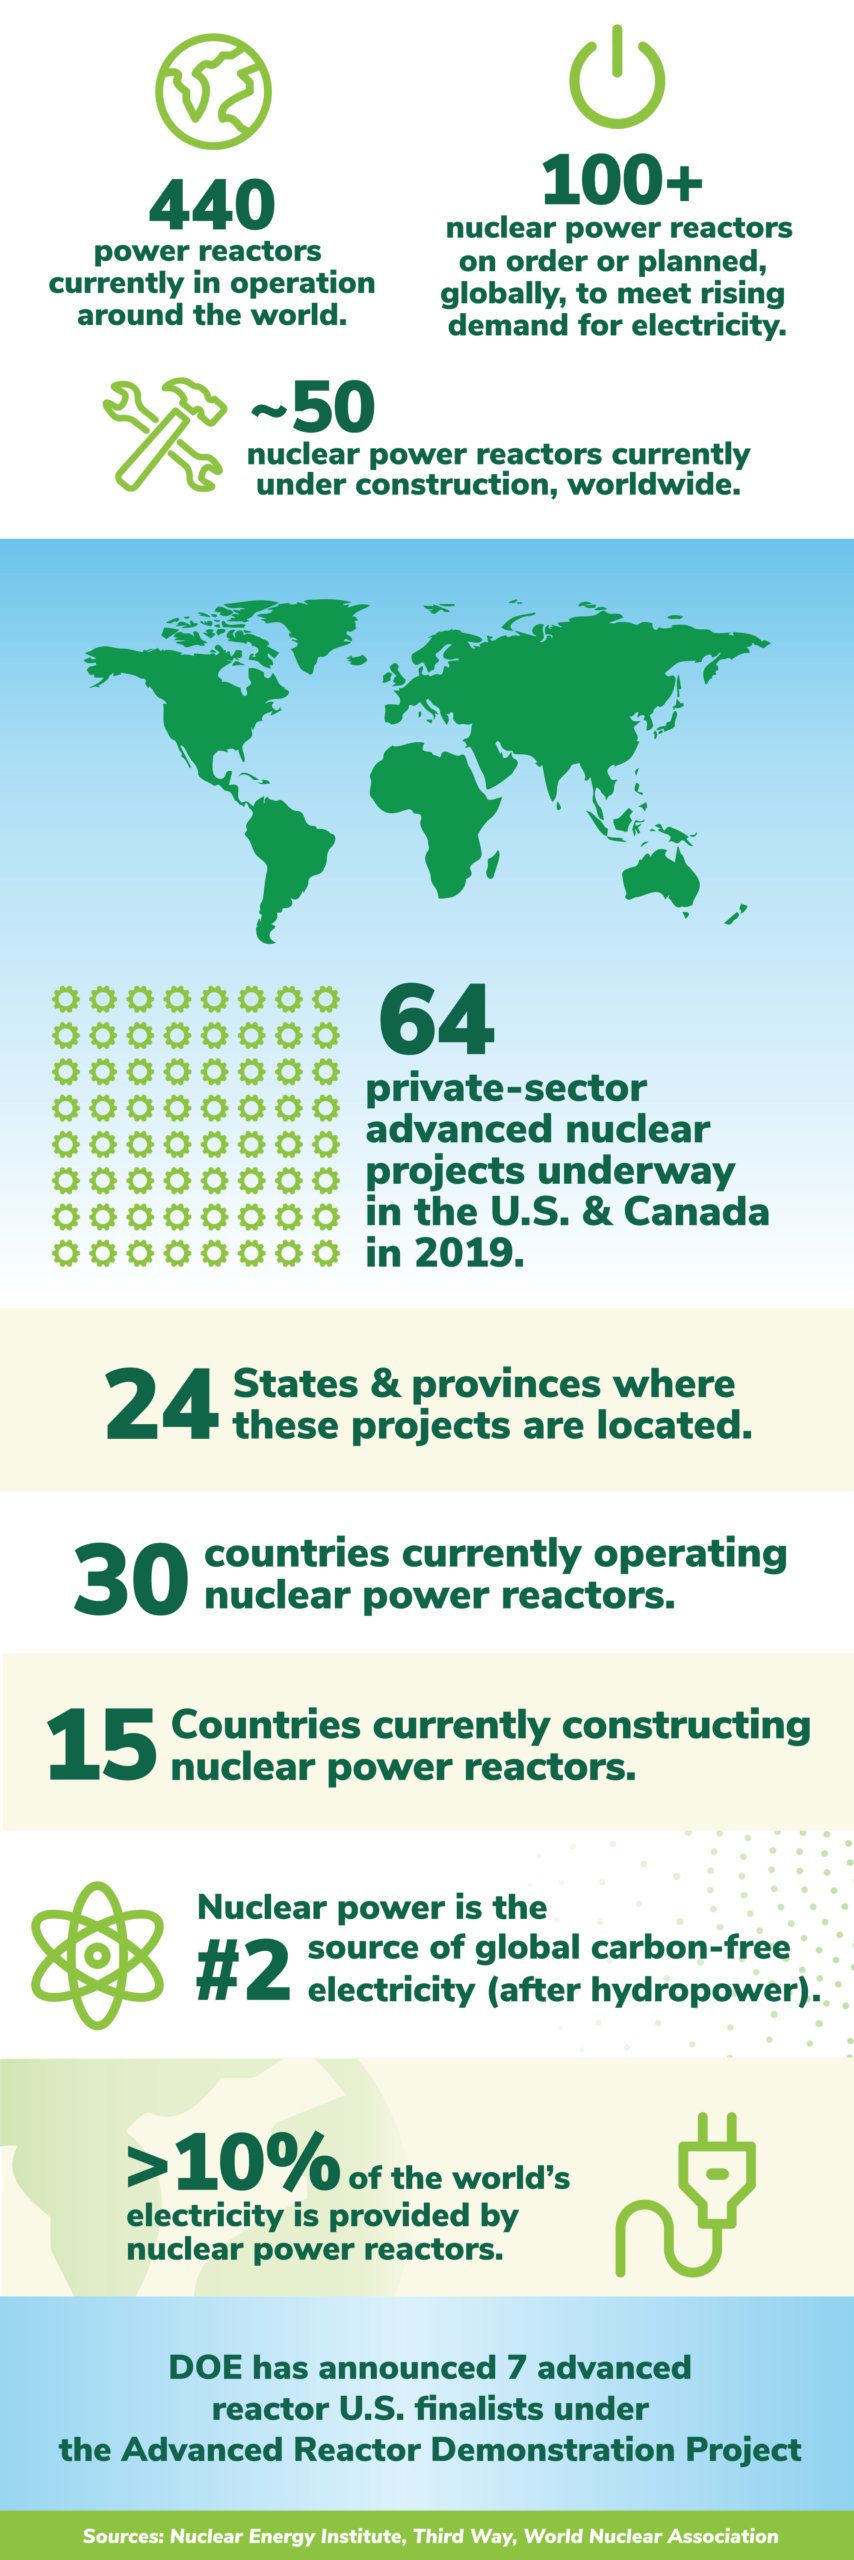 440 power reactors currently in operation around the world. 100+ nuclear power reactors are on order or planned, globally, to meet rising demand for electricity. Approximately 50 nuclear power reactors currently under construction, worldwide. 64 private-sector advanced nuclear projects are underway in the U.S. and Canada in 2019- in 24 states and provinces. 30 countries currently operate nuclear power reactors. 15 countries are currently constructing nuclear power reactors.  Nuclear power is the number 2 source of carbon-free electricity ( after hydropower). Less than 10% of the world's electricity is provided by nuclear power reactors.